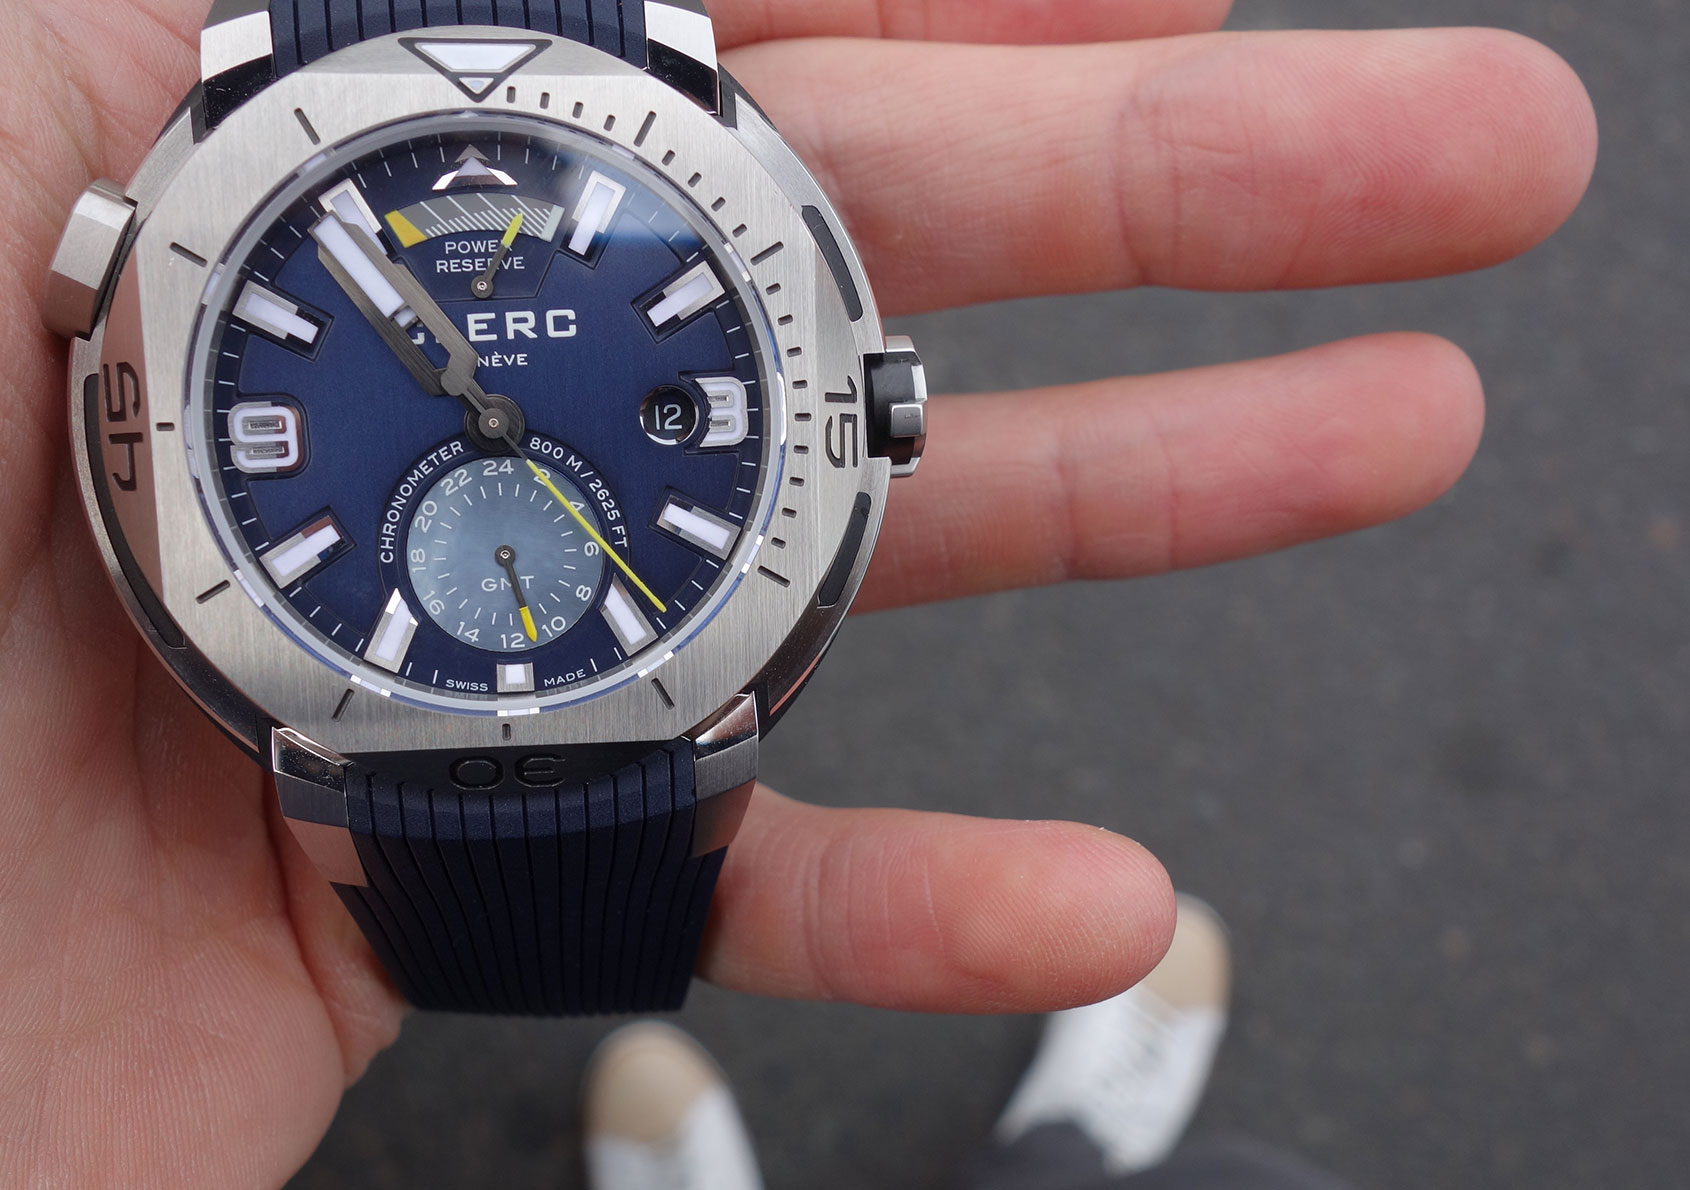 Clerc Hydroscaph Gmt Power Reserve Hands On Review